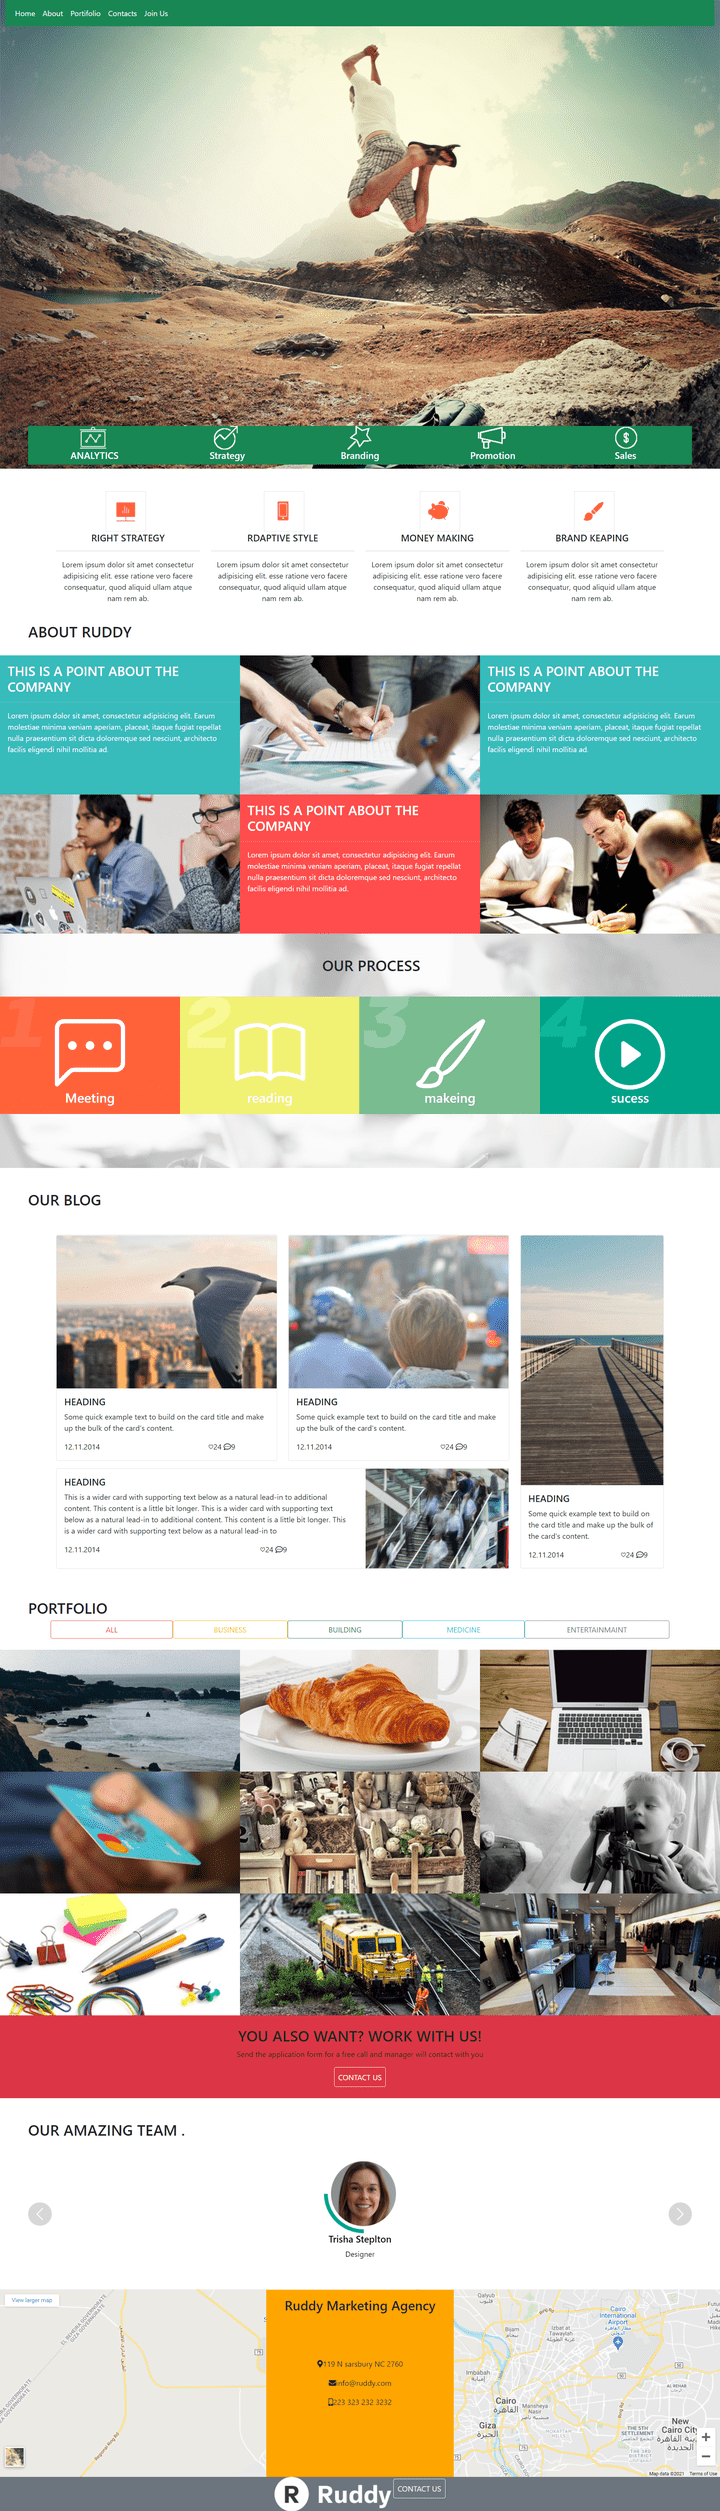 HTML/CSS/BOOTSTRAP PROJECT